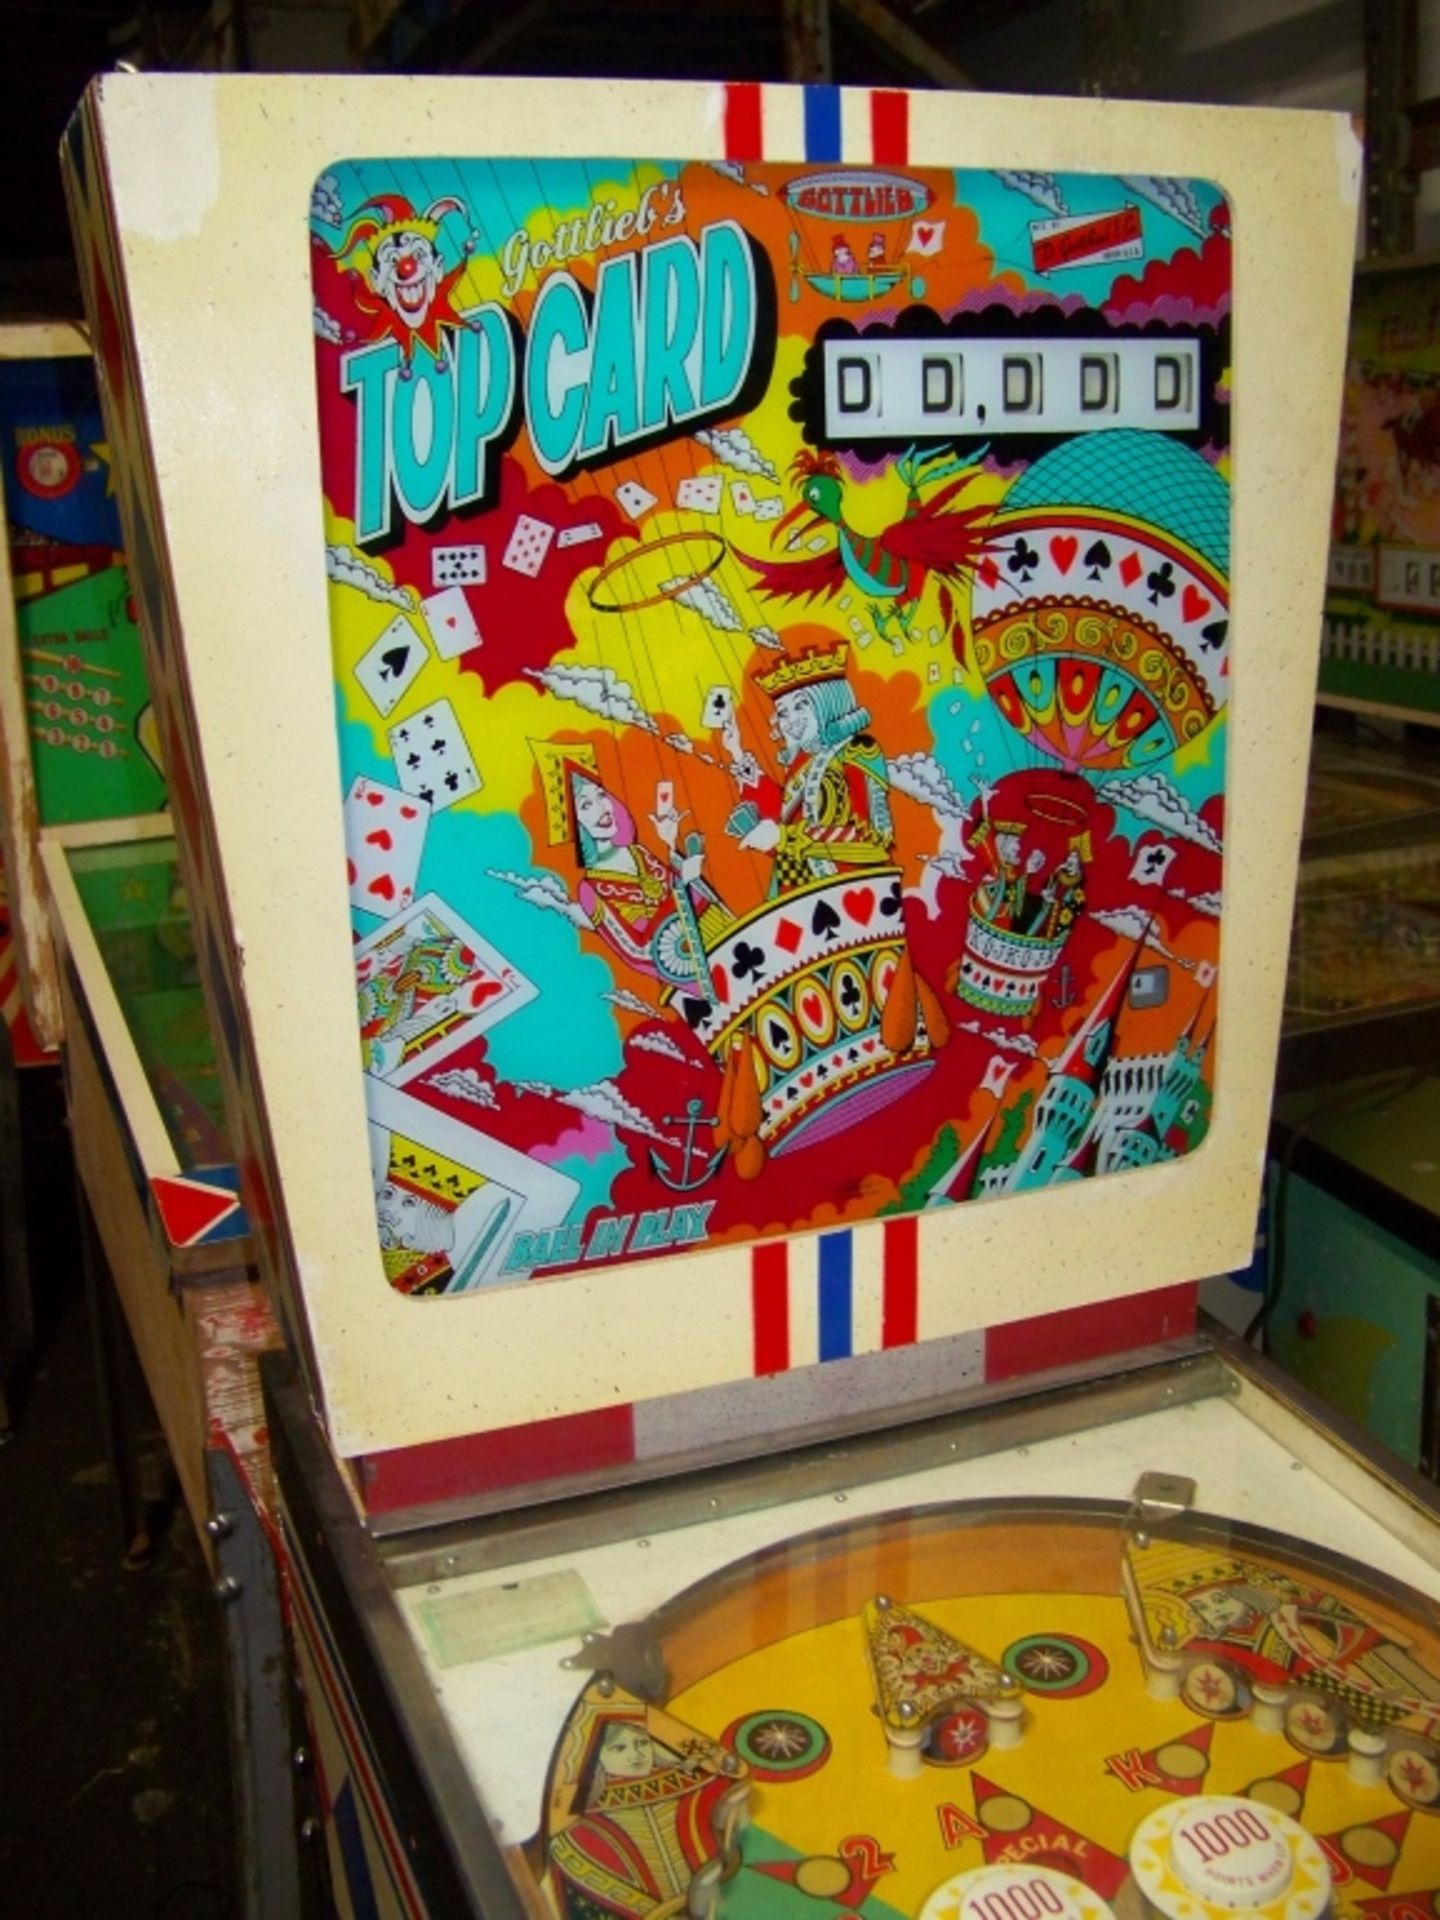 TOP CARD PINBALL MACHINE GOTTLIEB 1974 Item is in used condition. Evidence of wear and commercial